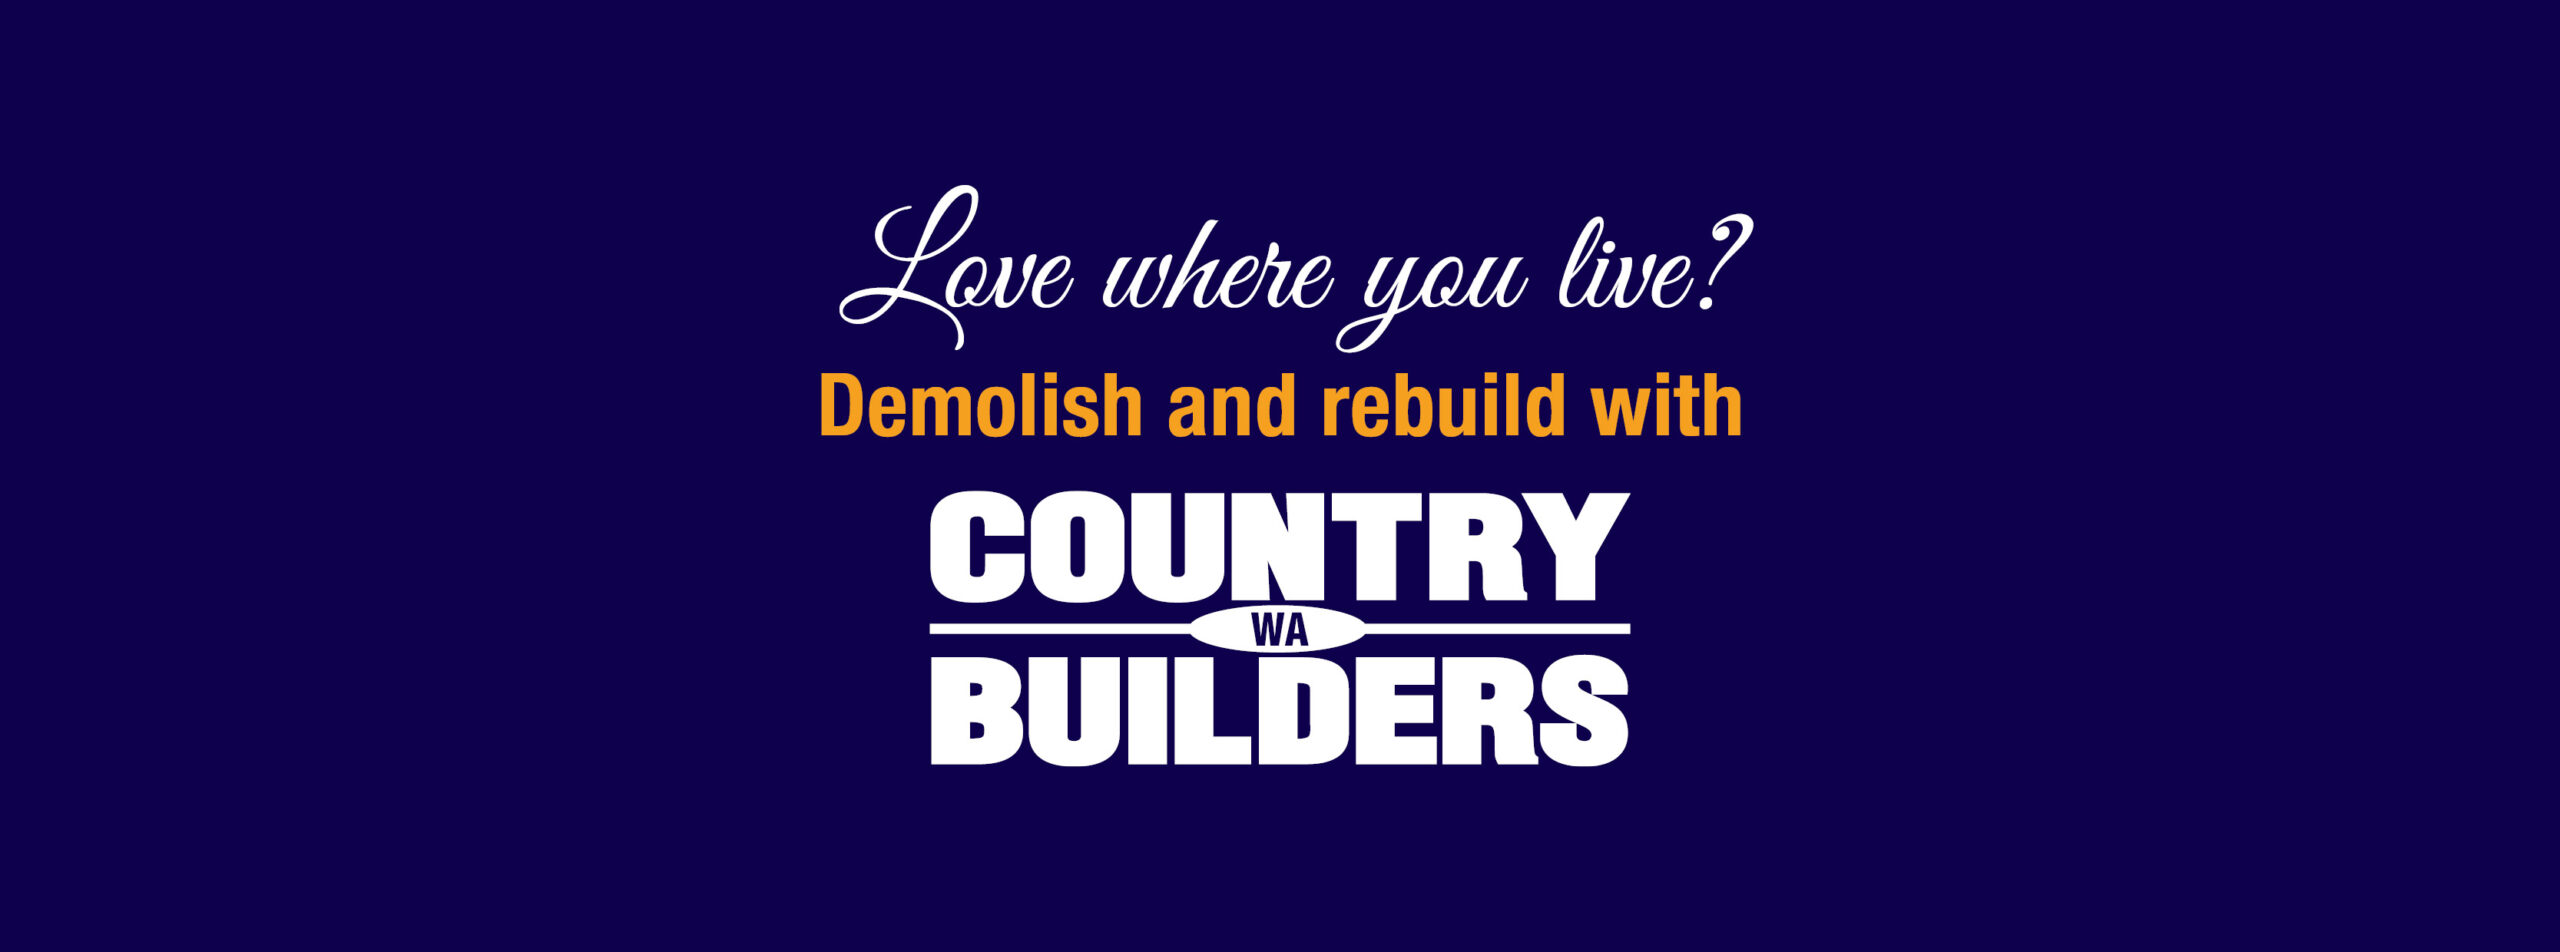 Love where you live? Demolish and rebuild with WA country builders